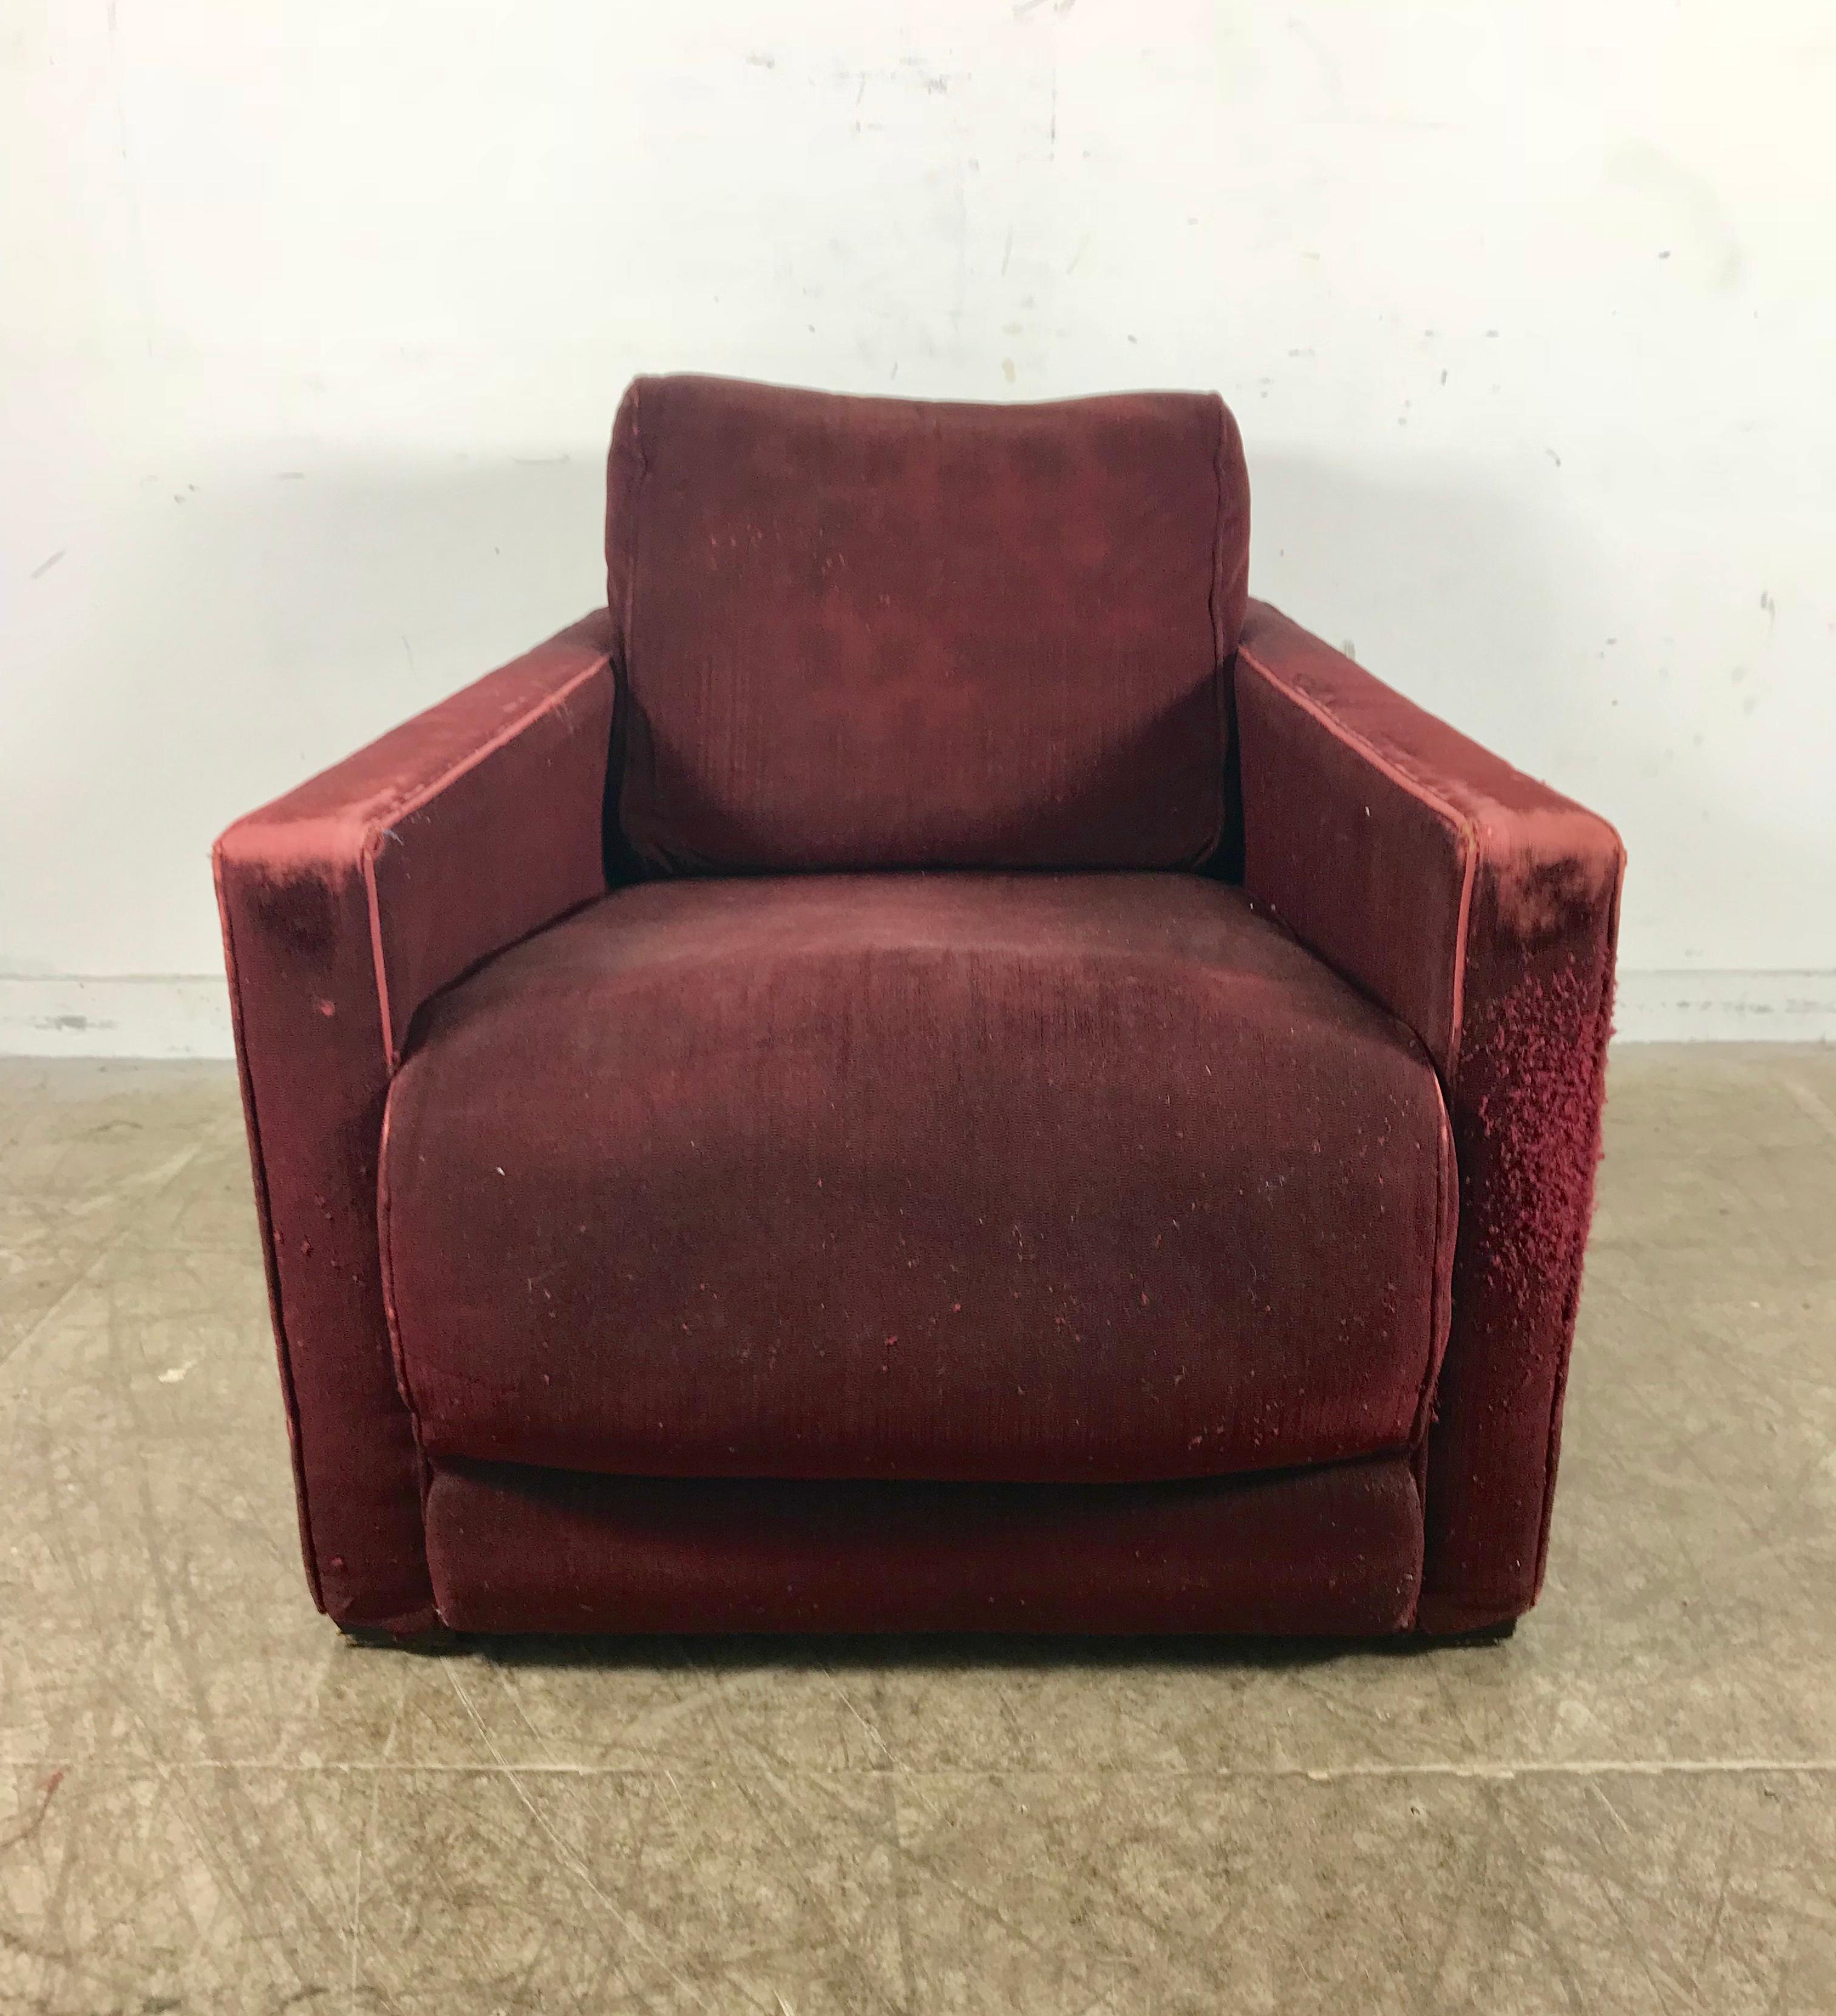 Art Deco streamline lounge chair by Gilbert Rohde for Herman Miller, circa 1937, amazing quality and design, extremely comfortable. Important transitional design from Art Deco to Modern, retains original burgundy mohair fabric. Minor fabric pulls,